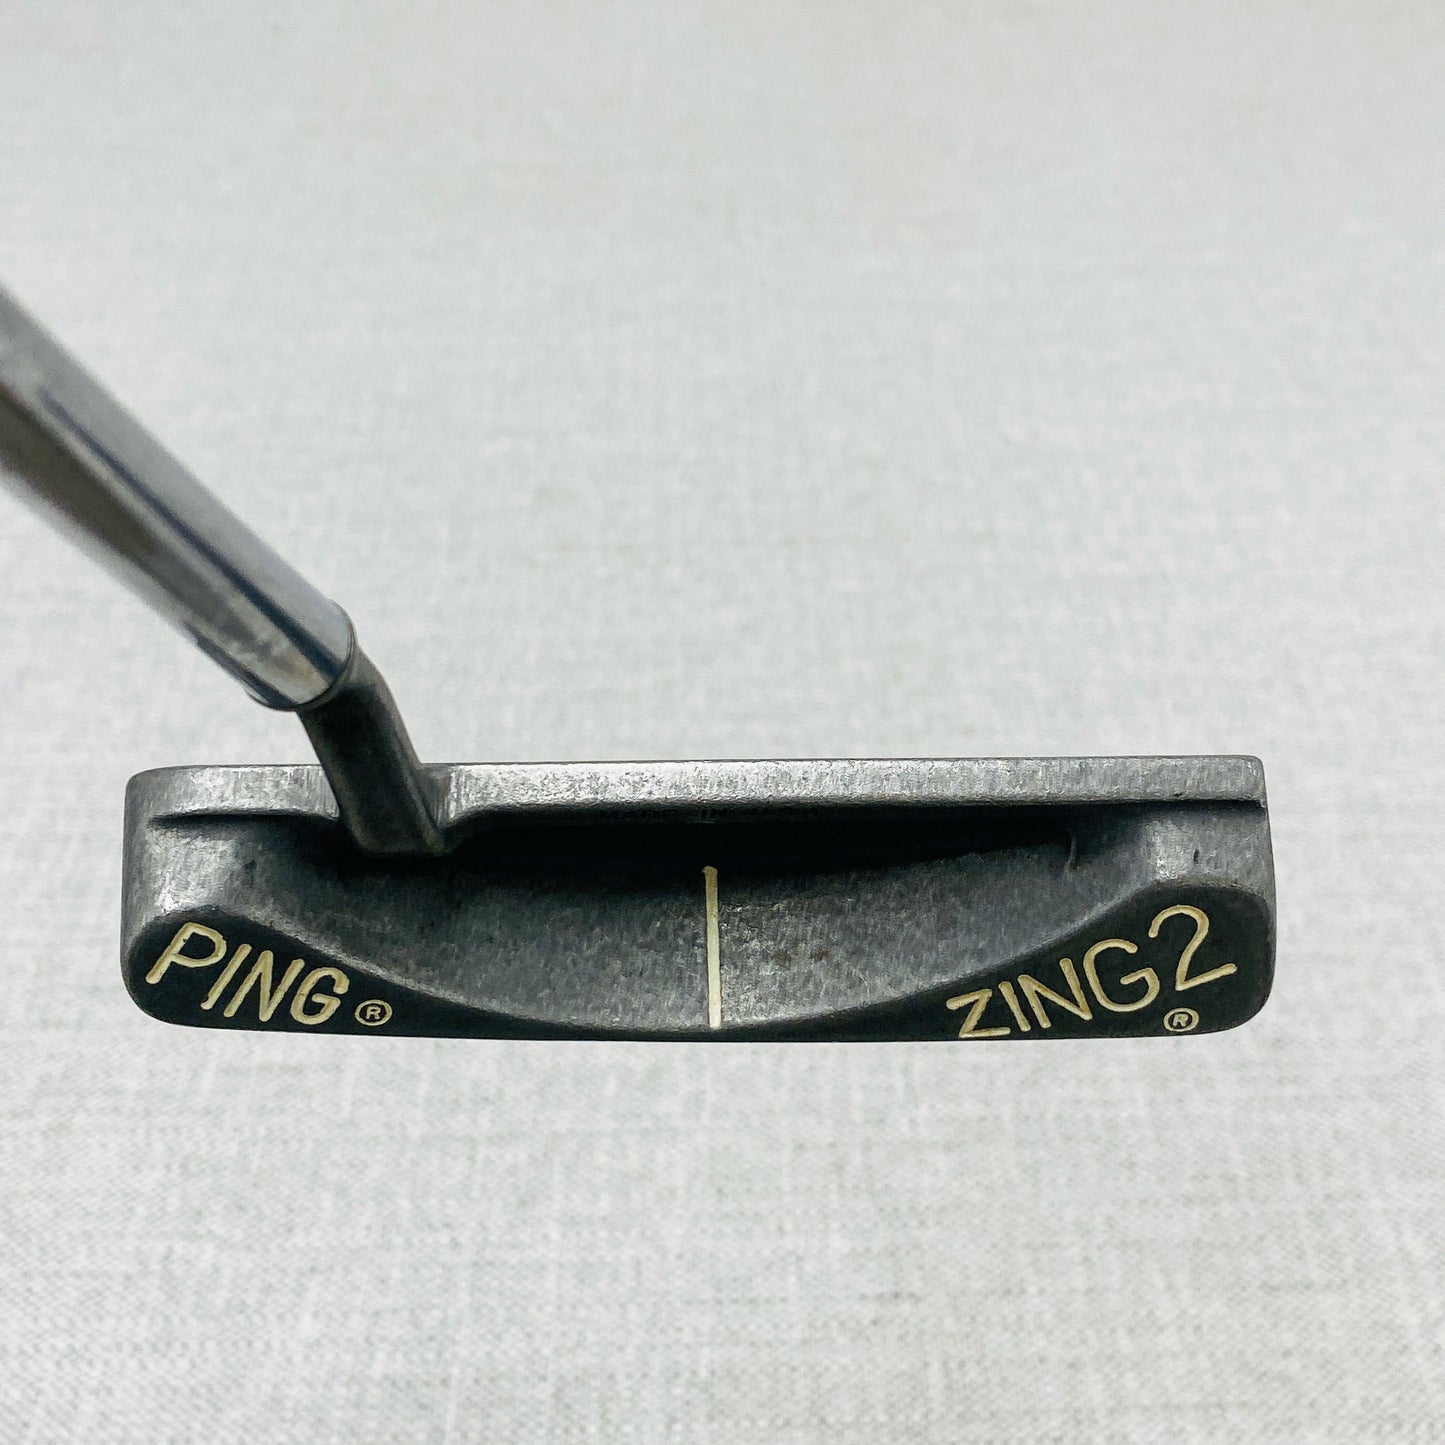 PING Zing 2 Stainless Putter. 35 inch - Excellent Condition # T1005